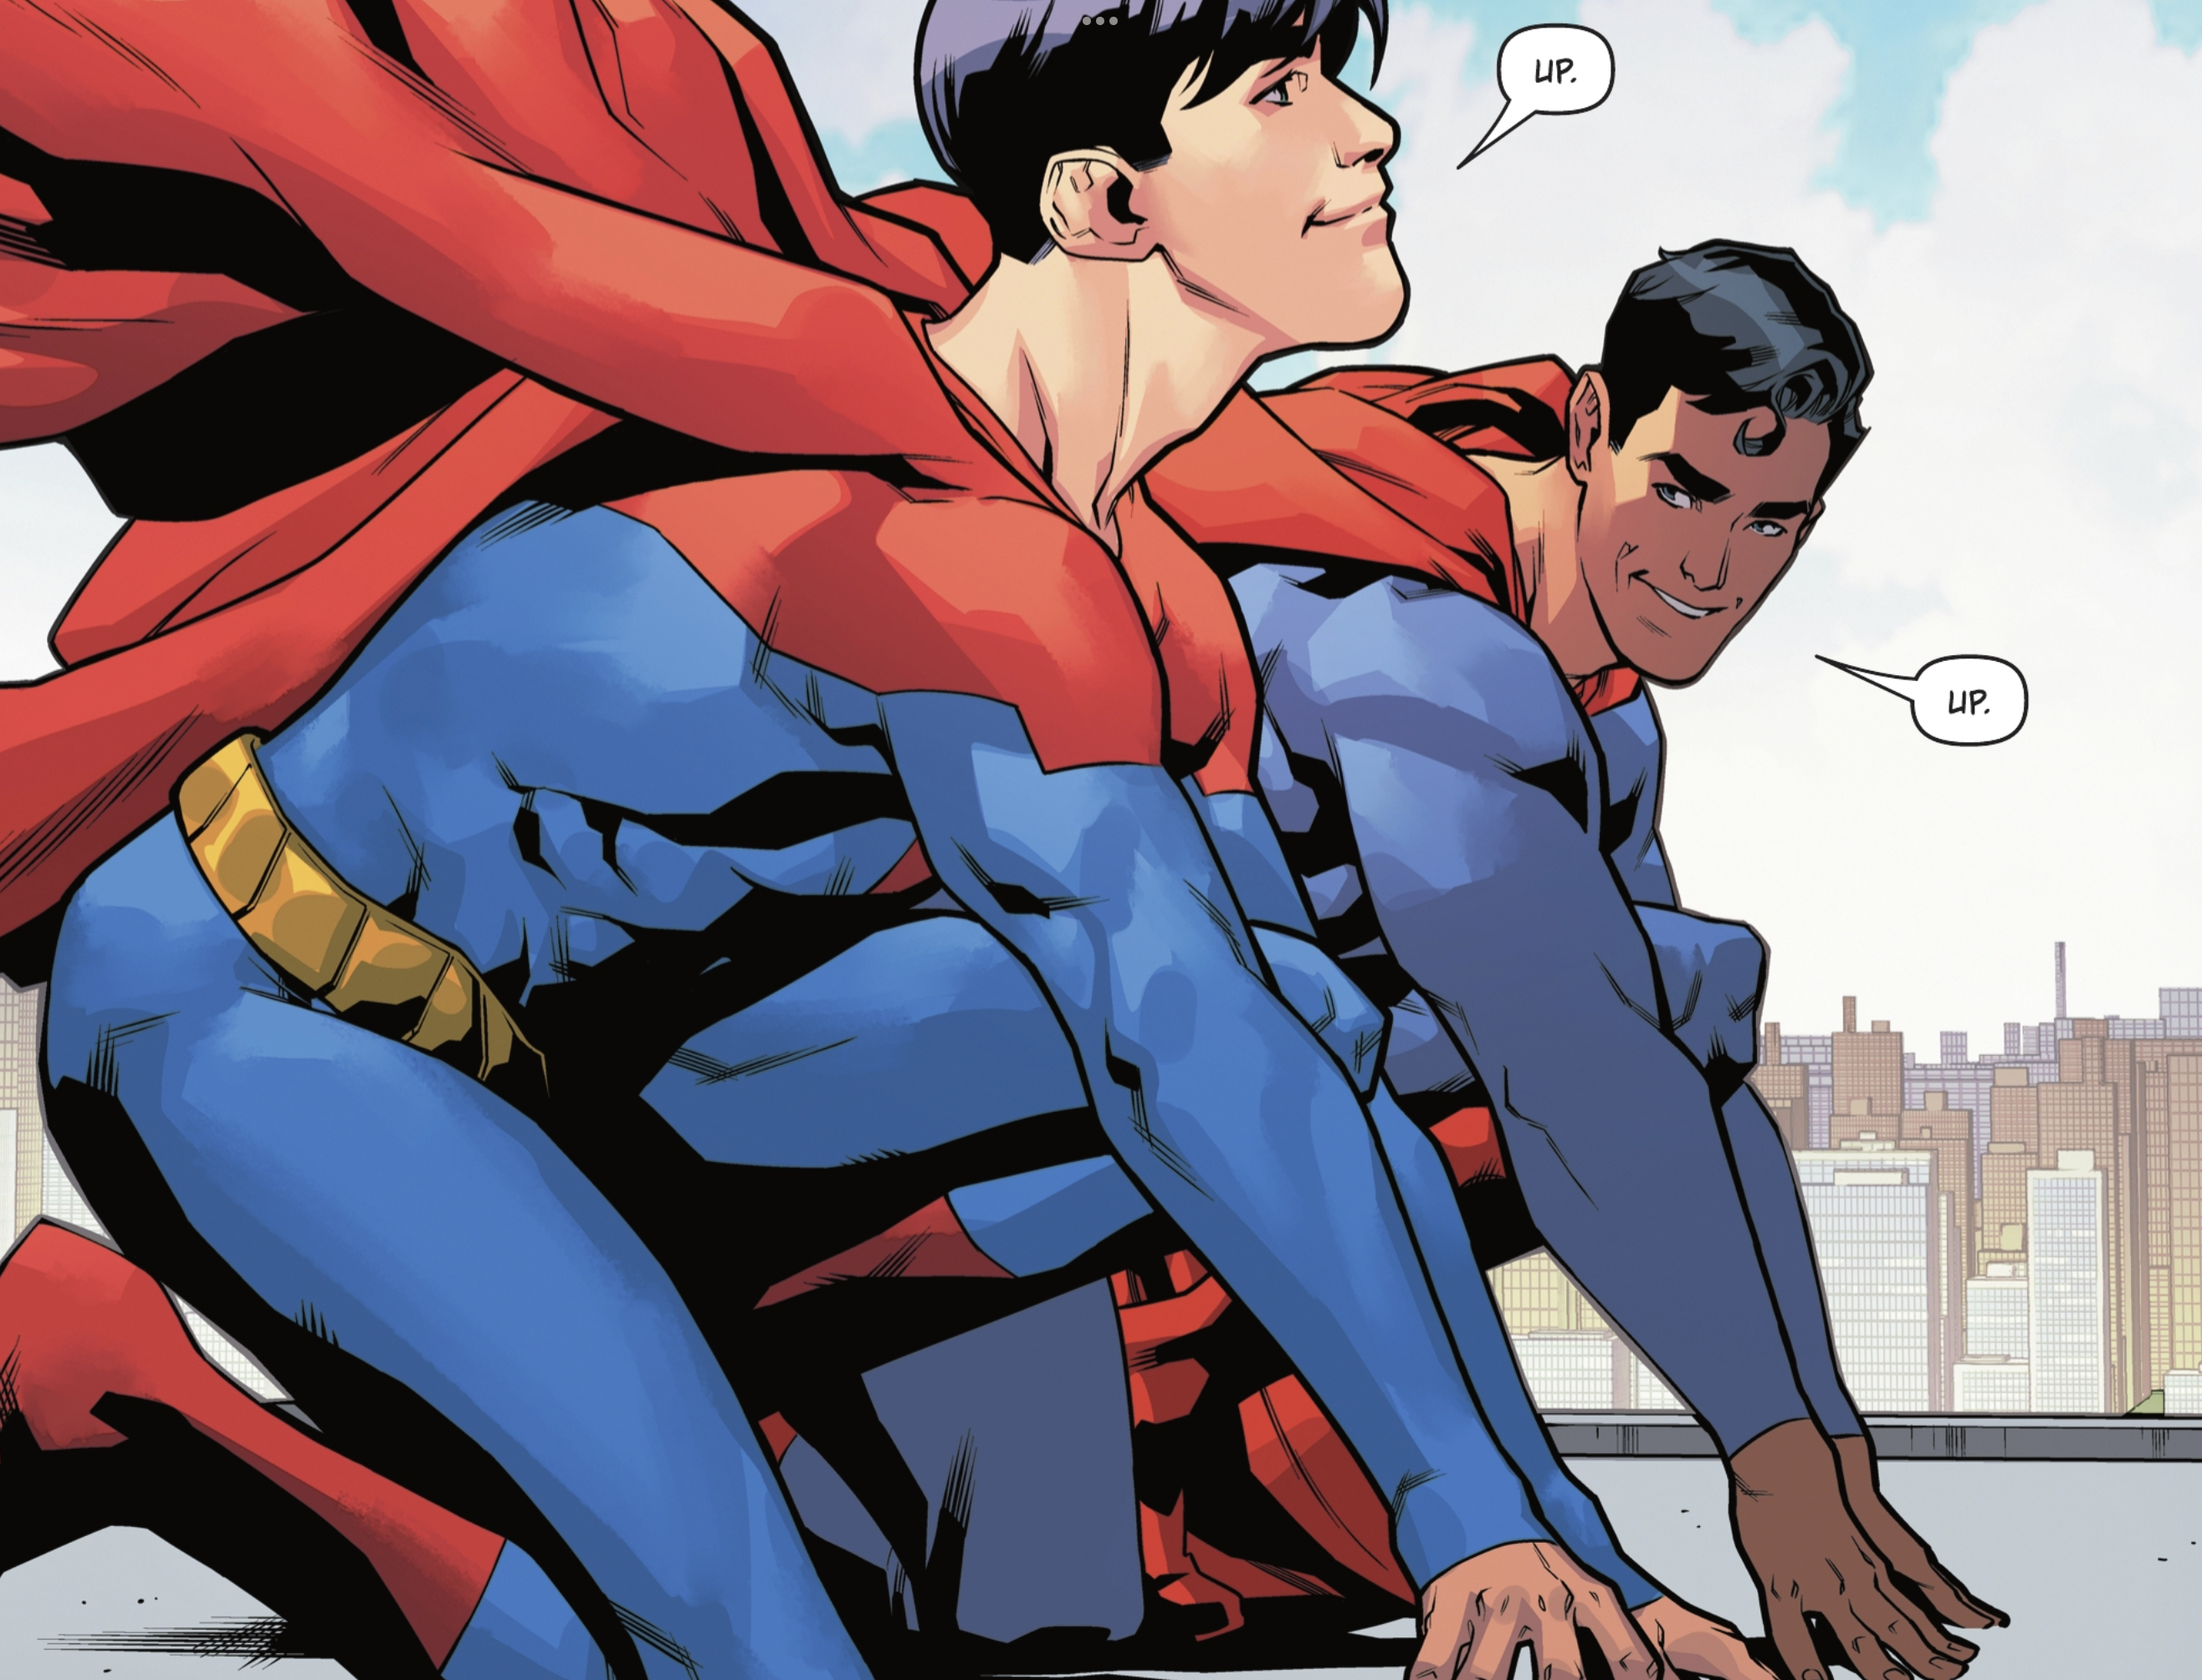 Crouching, Jon Kent/Superman and Clark Kent/Superman grin at each other. “Up.” “Up.” they take turns counting off the start of their race in Superman: Son of Kal-El #17 (2022). 